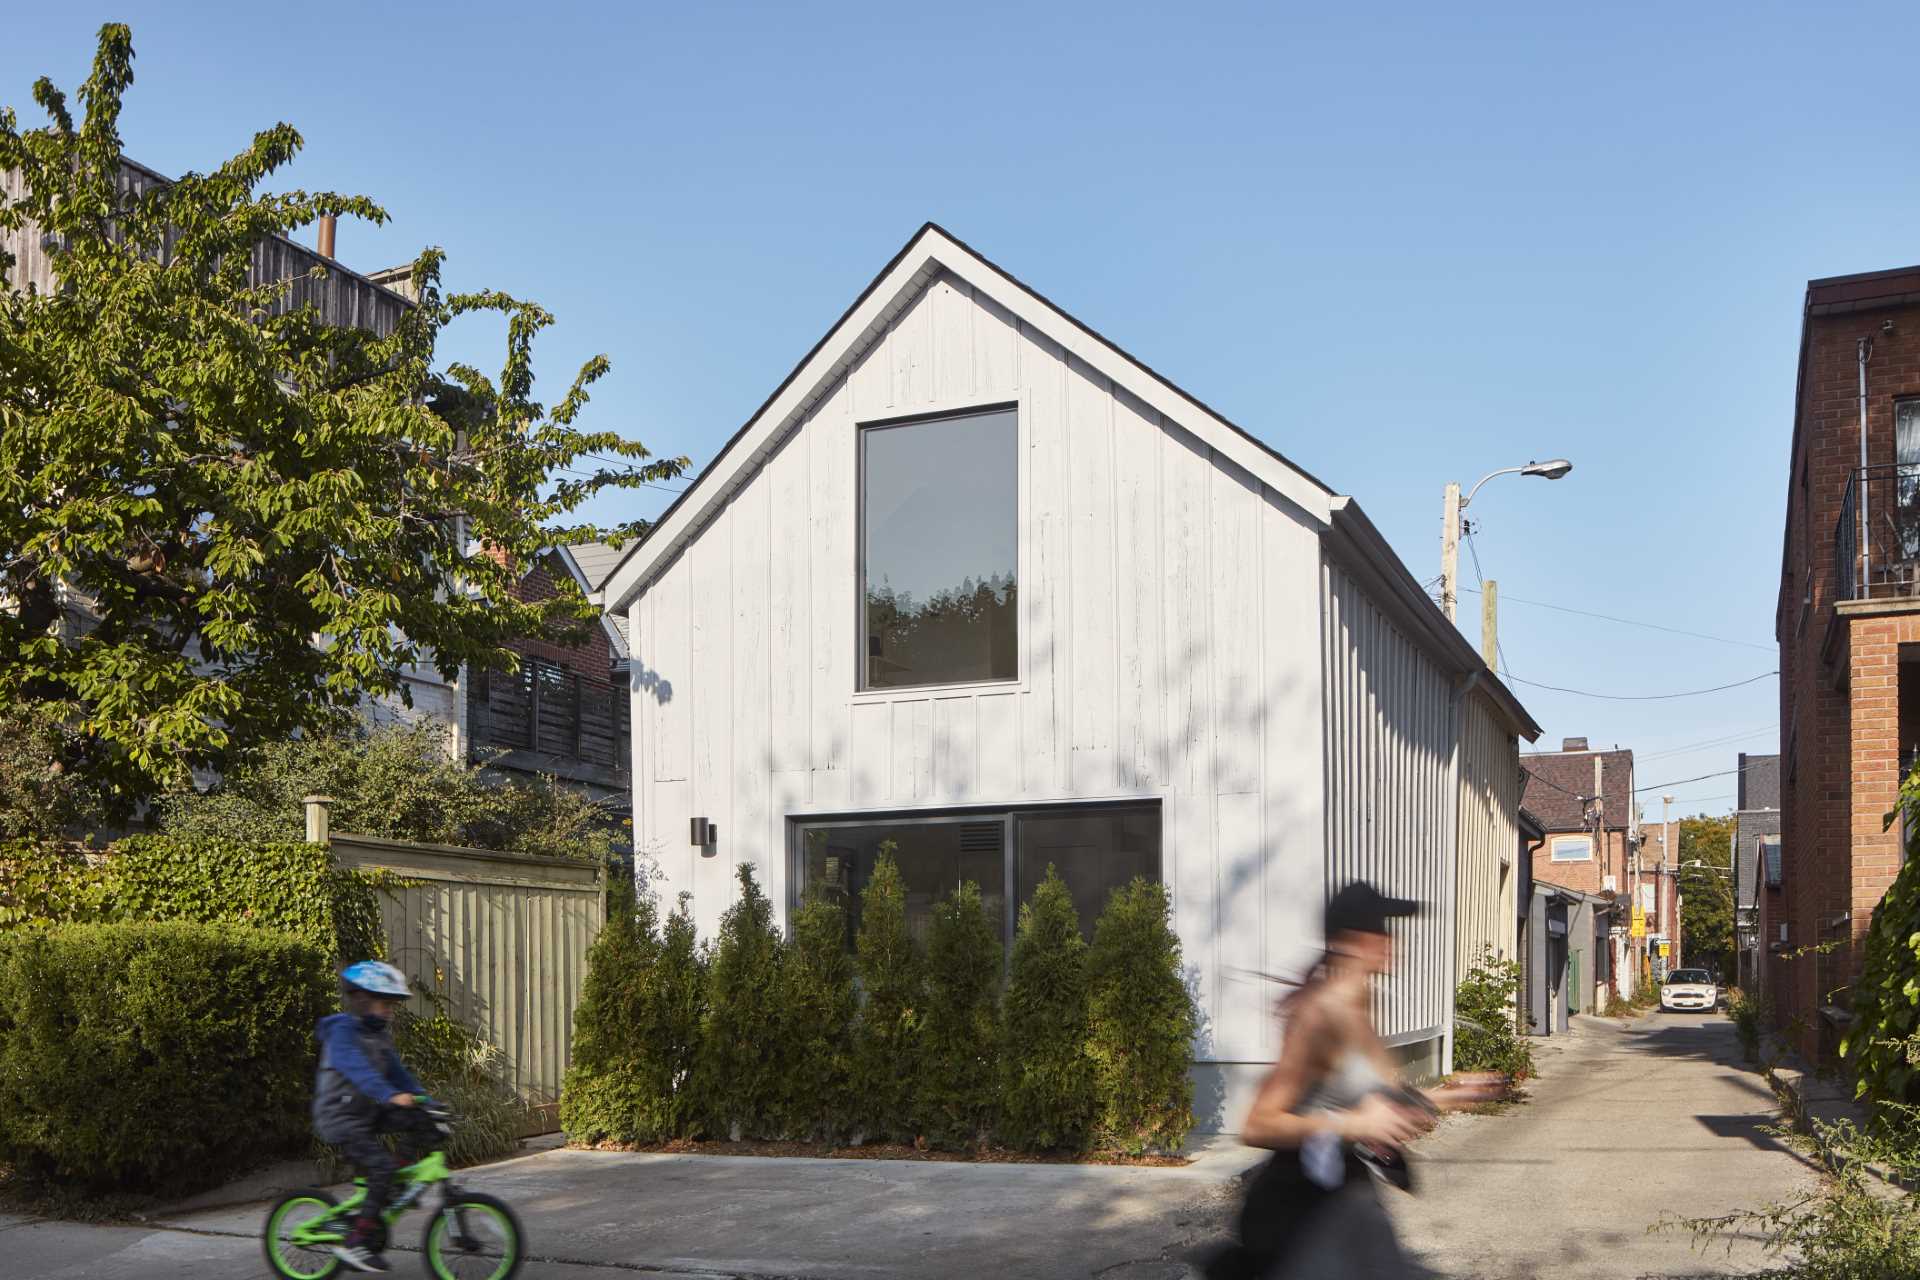 A garage has been converted into a small laneway house.